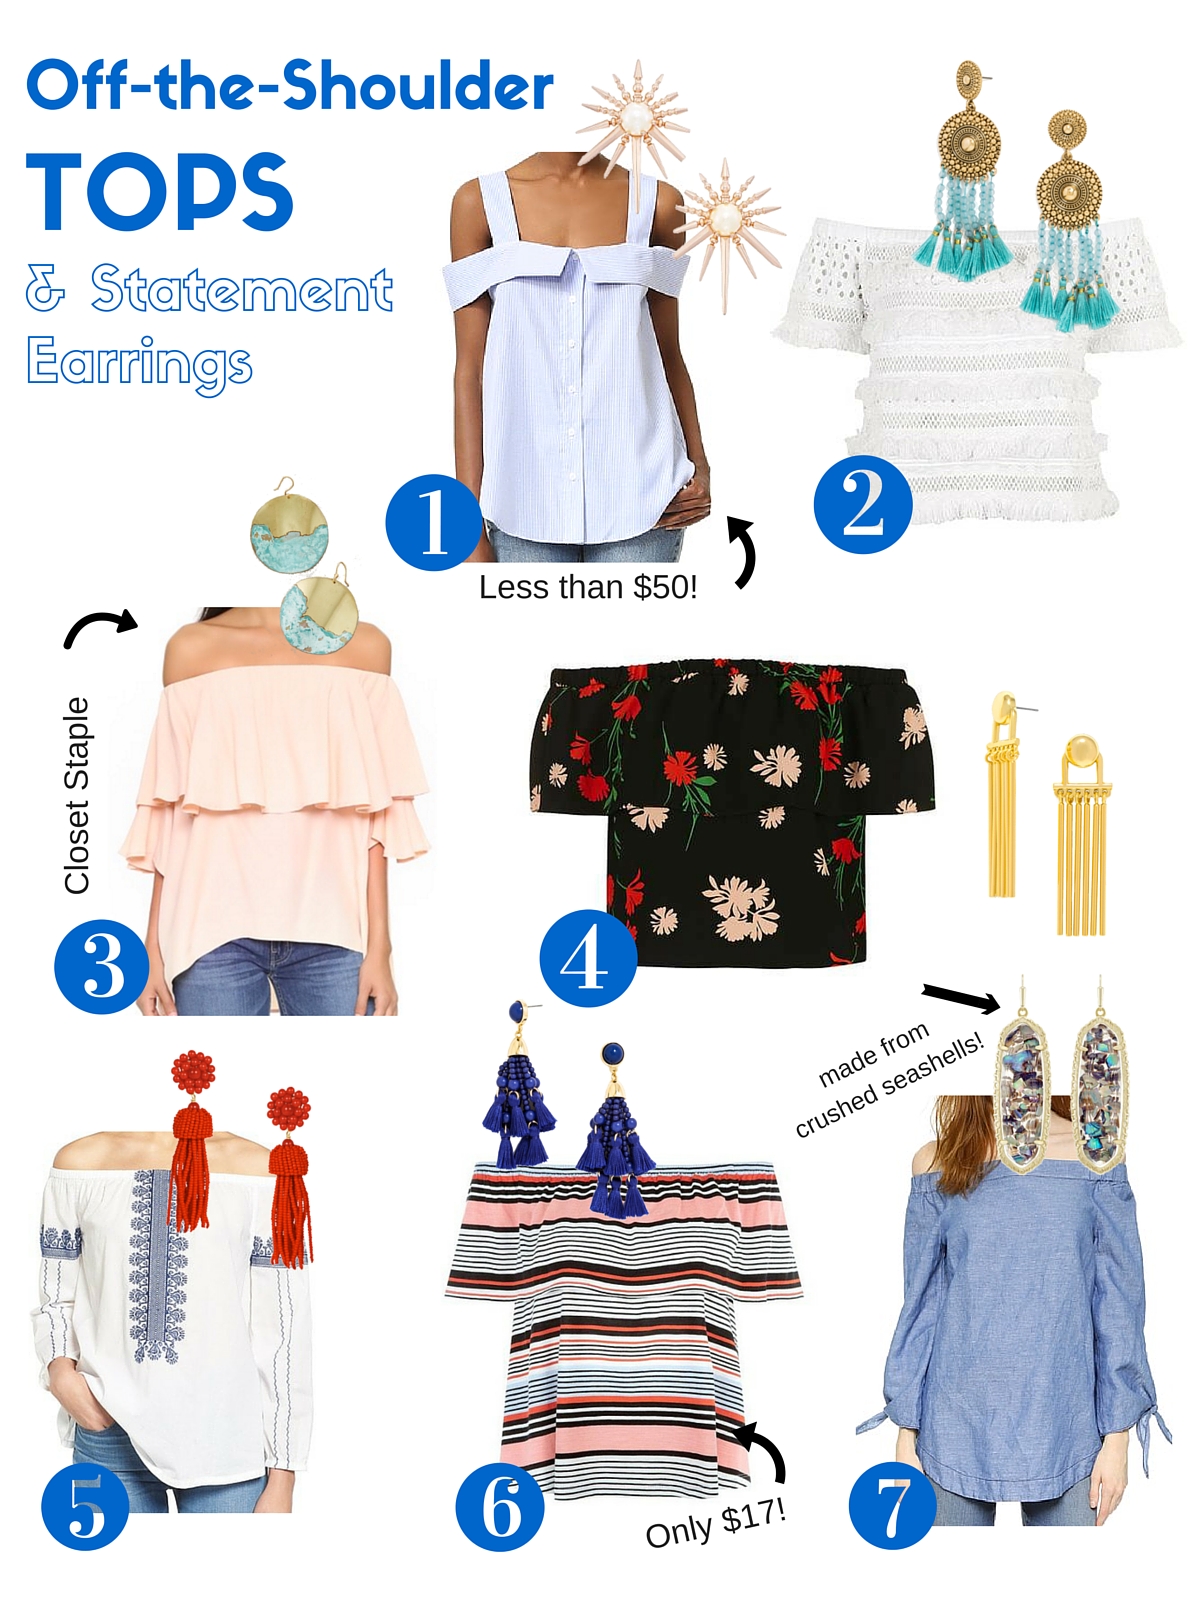 Off the shoulder tops and statement earrings outfiti ideas, summer outfit inspiration, bauble bar statement earrings, how to style statement earrings, how to style off the shoulder tops  | The Best Off-the-Shoulder Tops & Statement Earrings for Summer featured by top Houston fashion blog, Lone Star Looking Glass